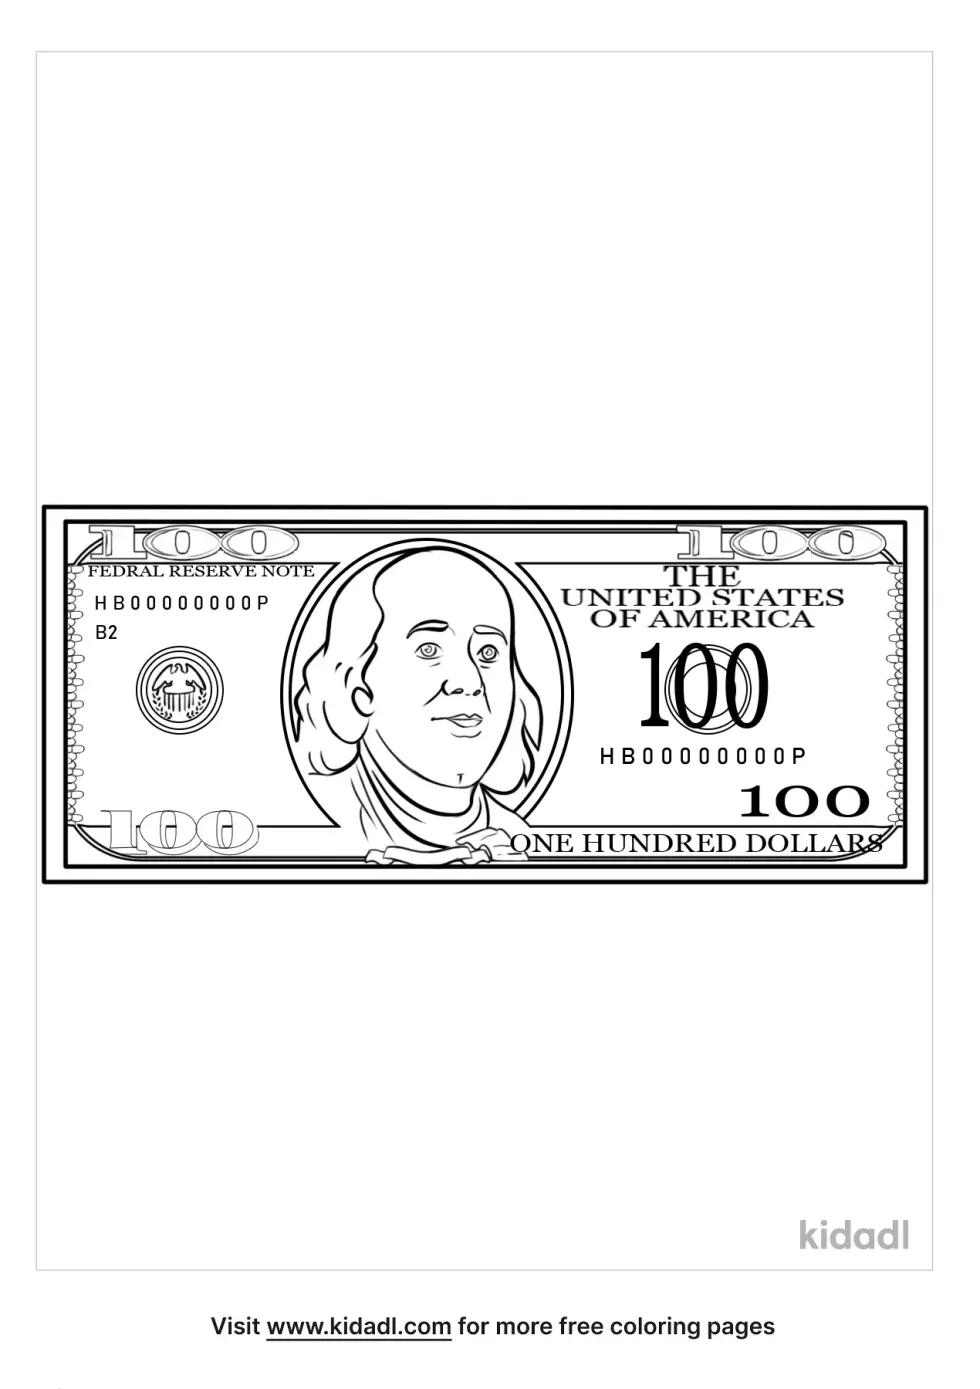 A coloring image showing a 100 US dollar bill